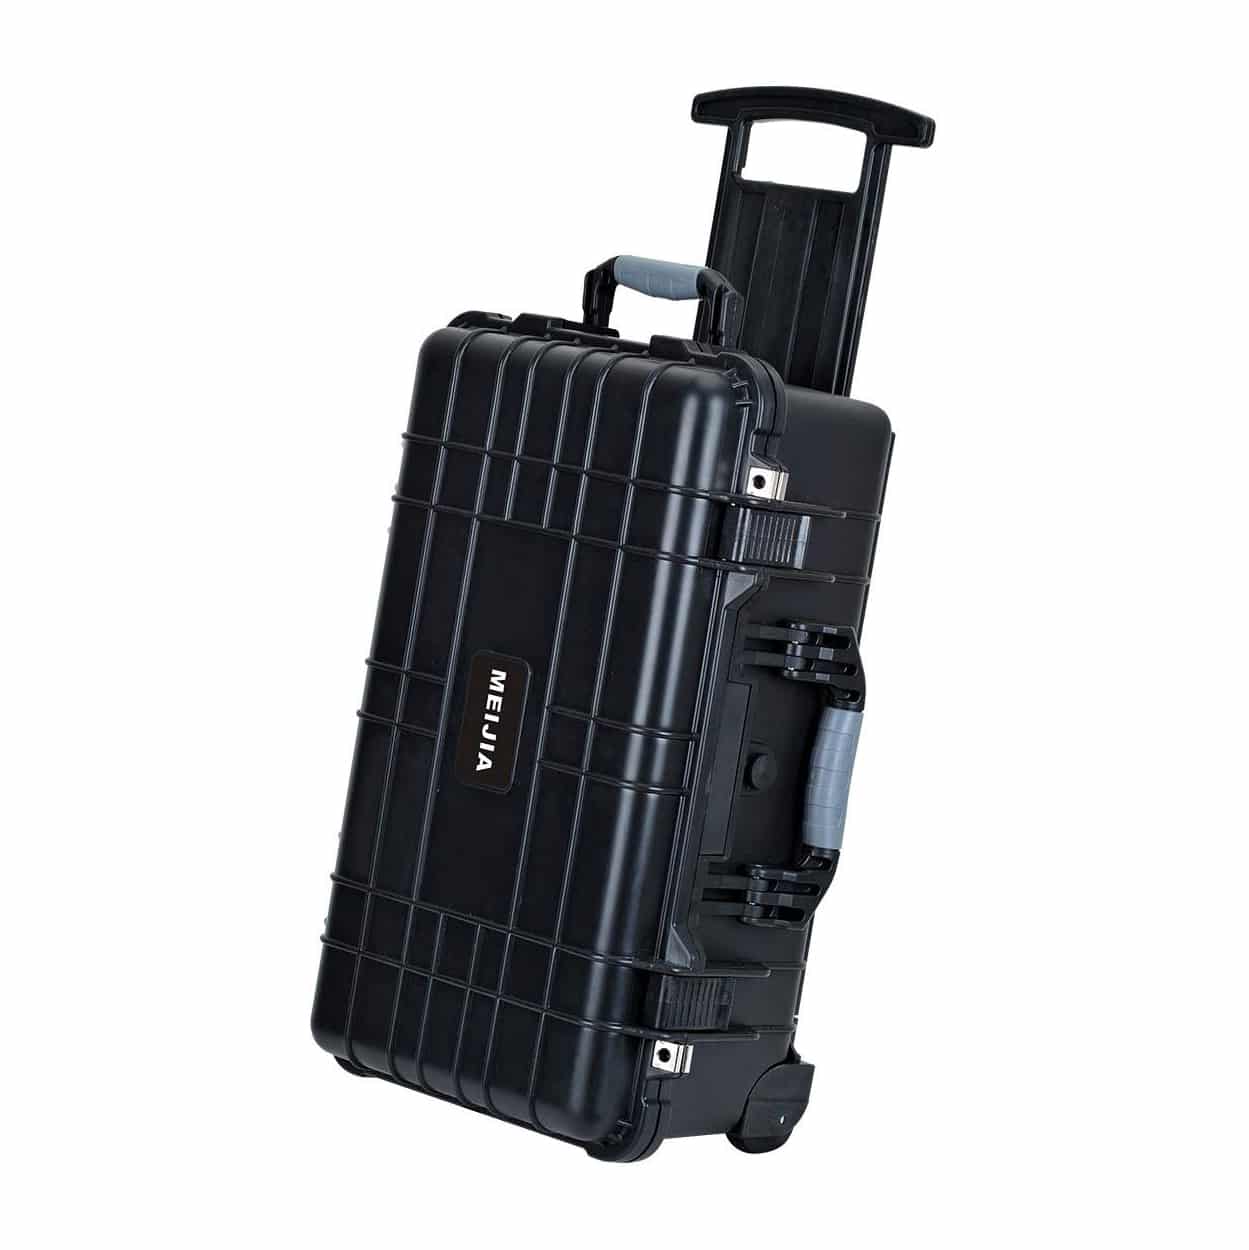 Top 10 Best Transport Cases with Foam in 2021 Reviews